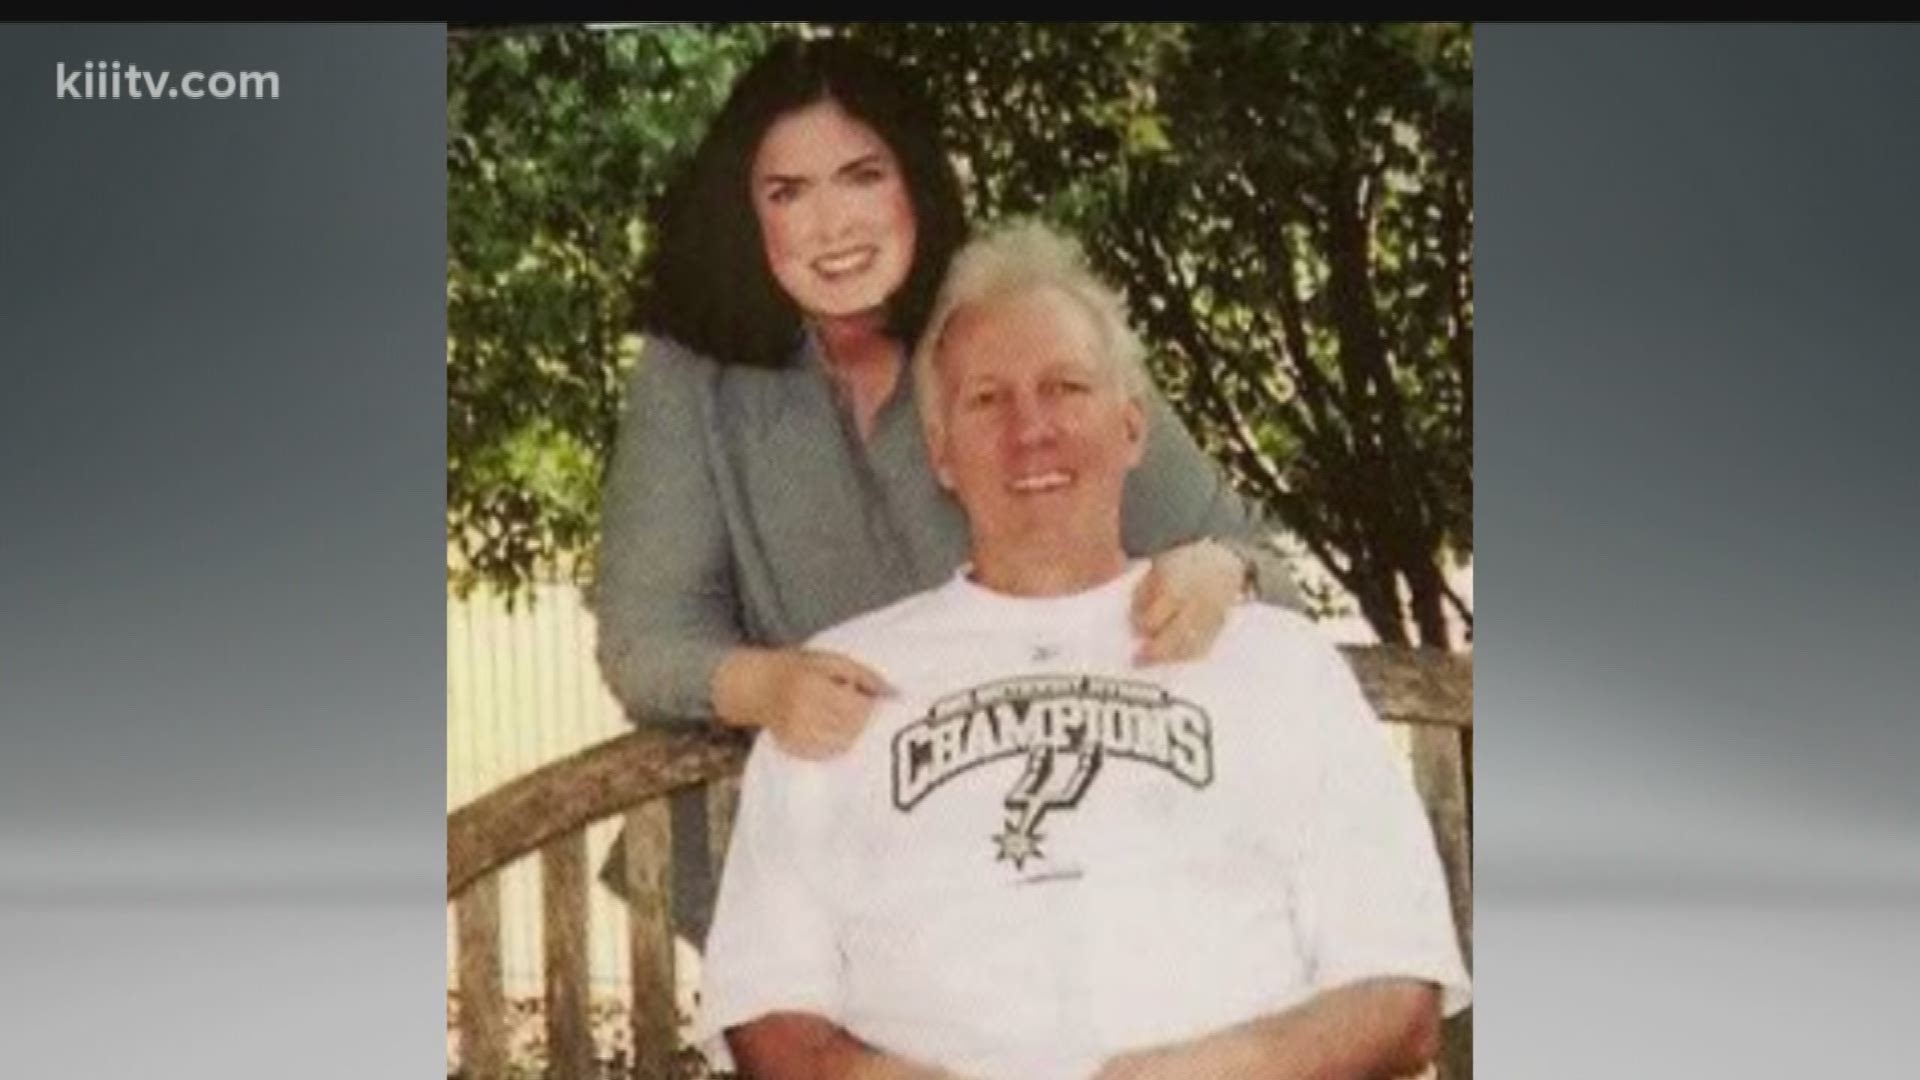 Erin Popovich had long since been battling an illness according to a statement released by the Spurs. She was 67 years old.